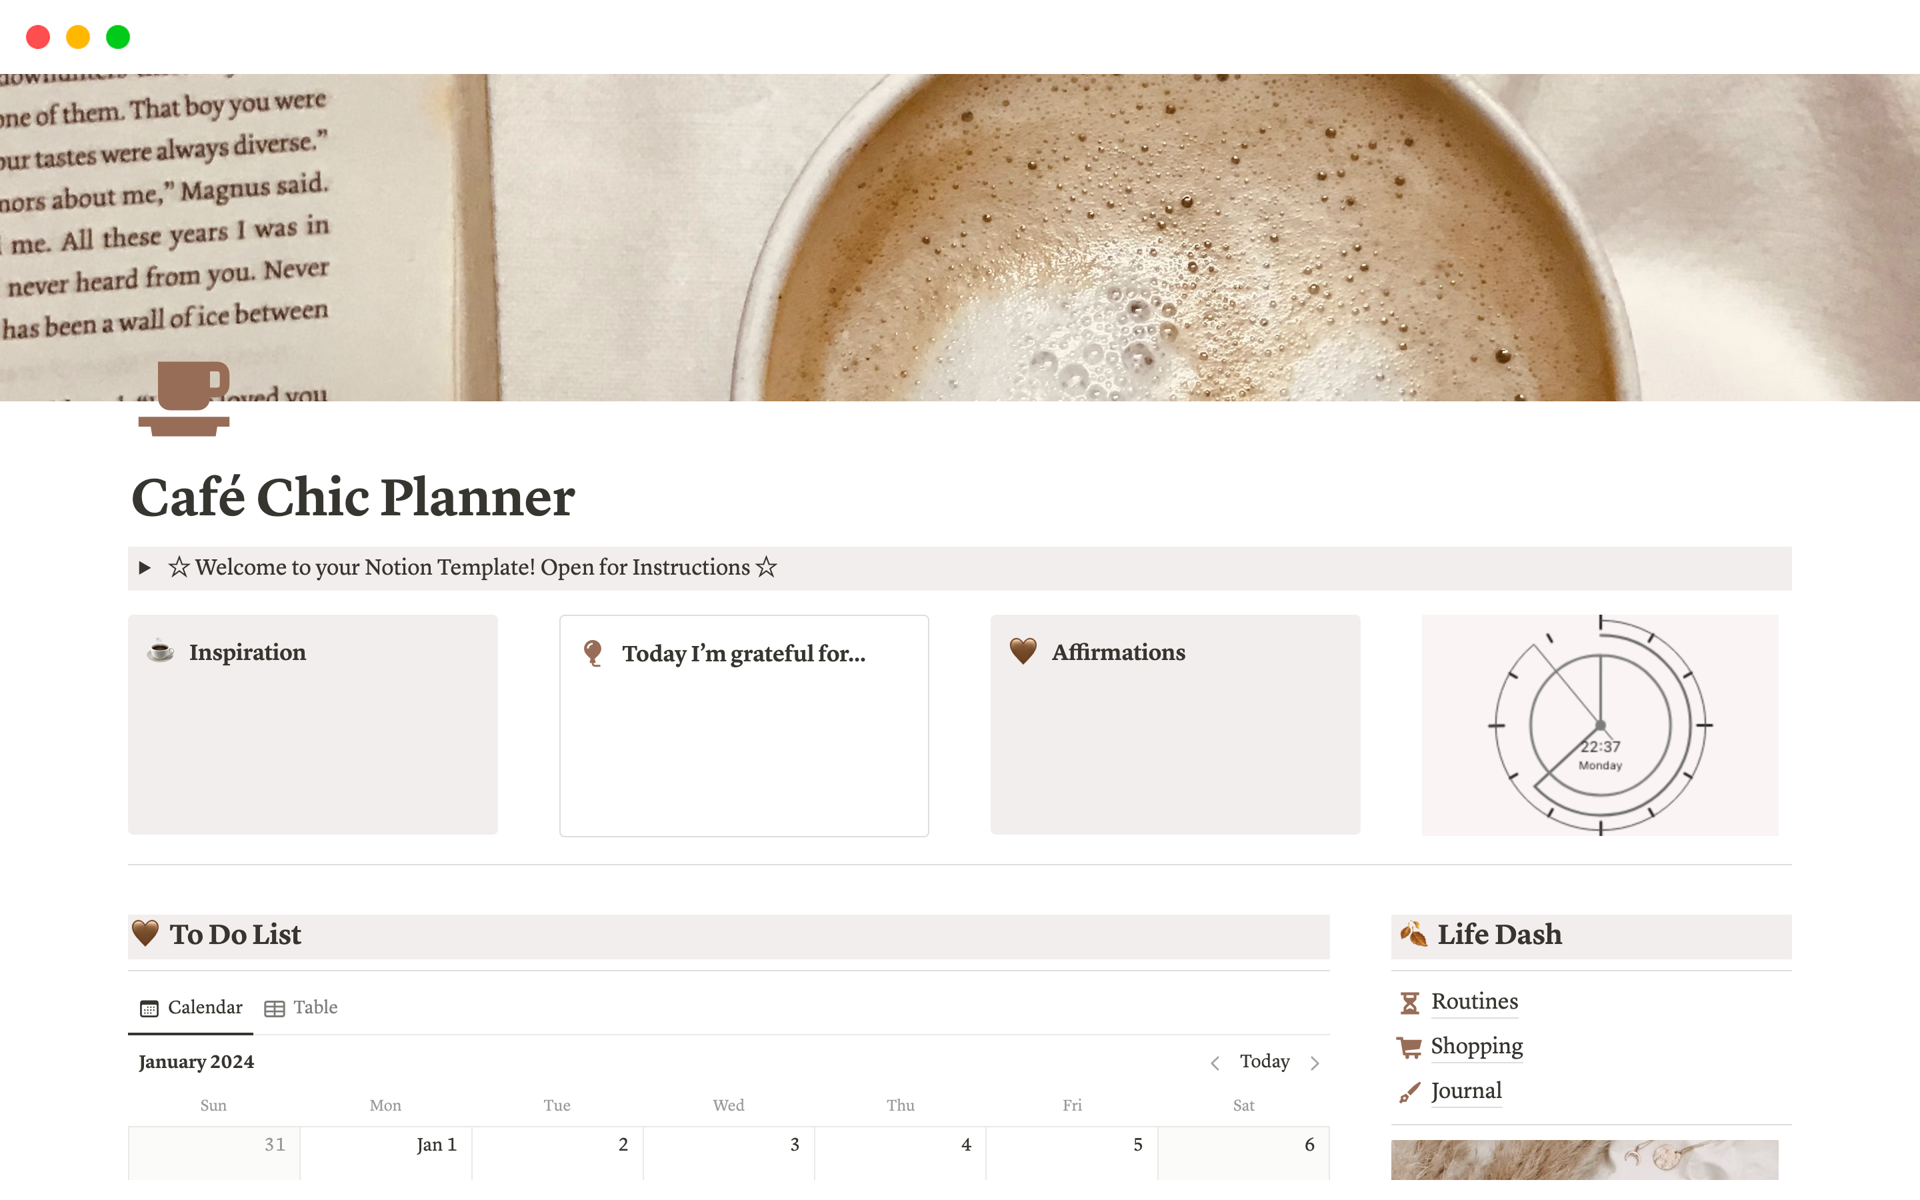 Café Chic Planner - your key to balanced living and business success. Download our Notion Template for sophistication in every click